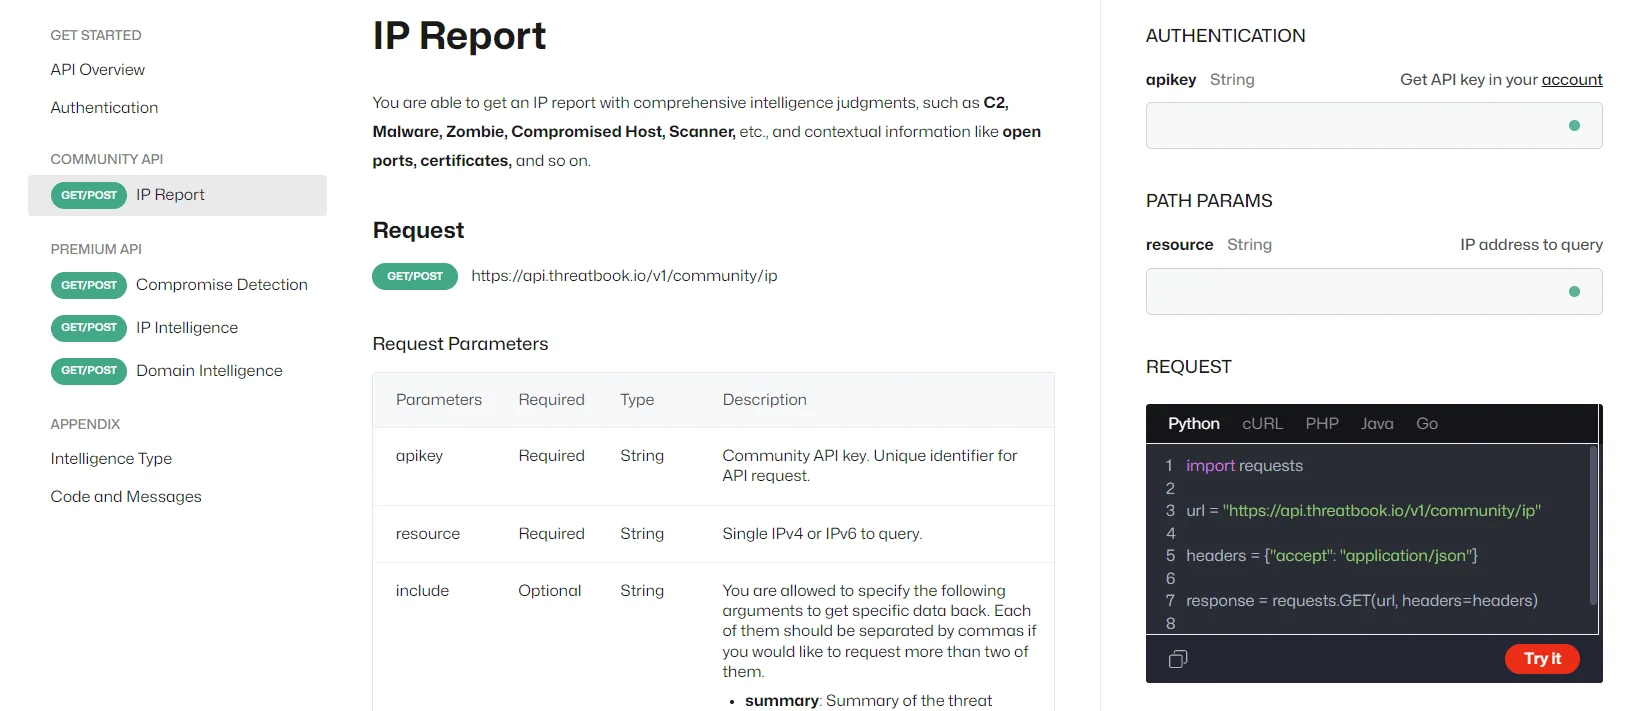 ThreatBook’s Community API only has IP Report function